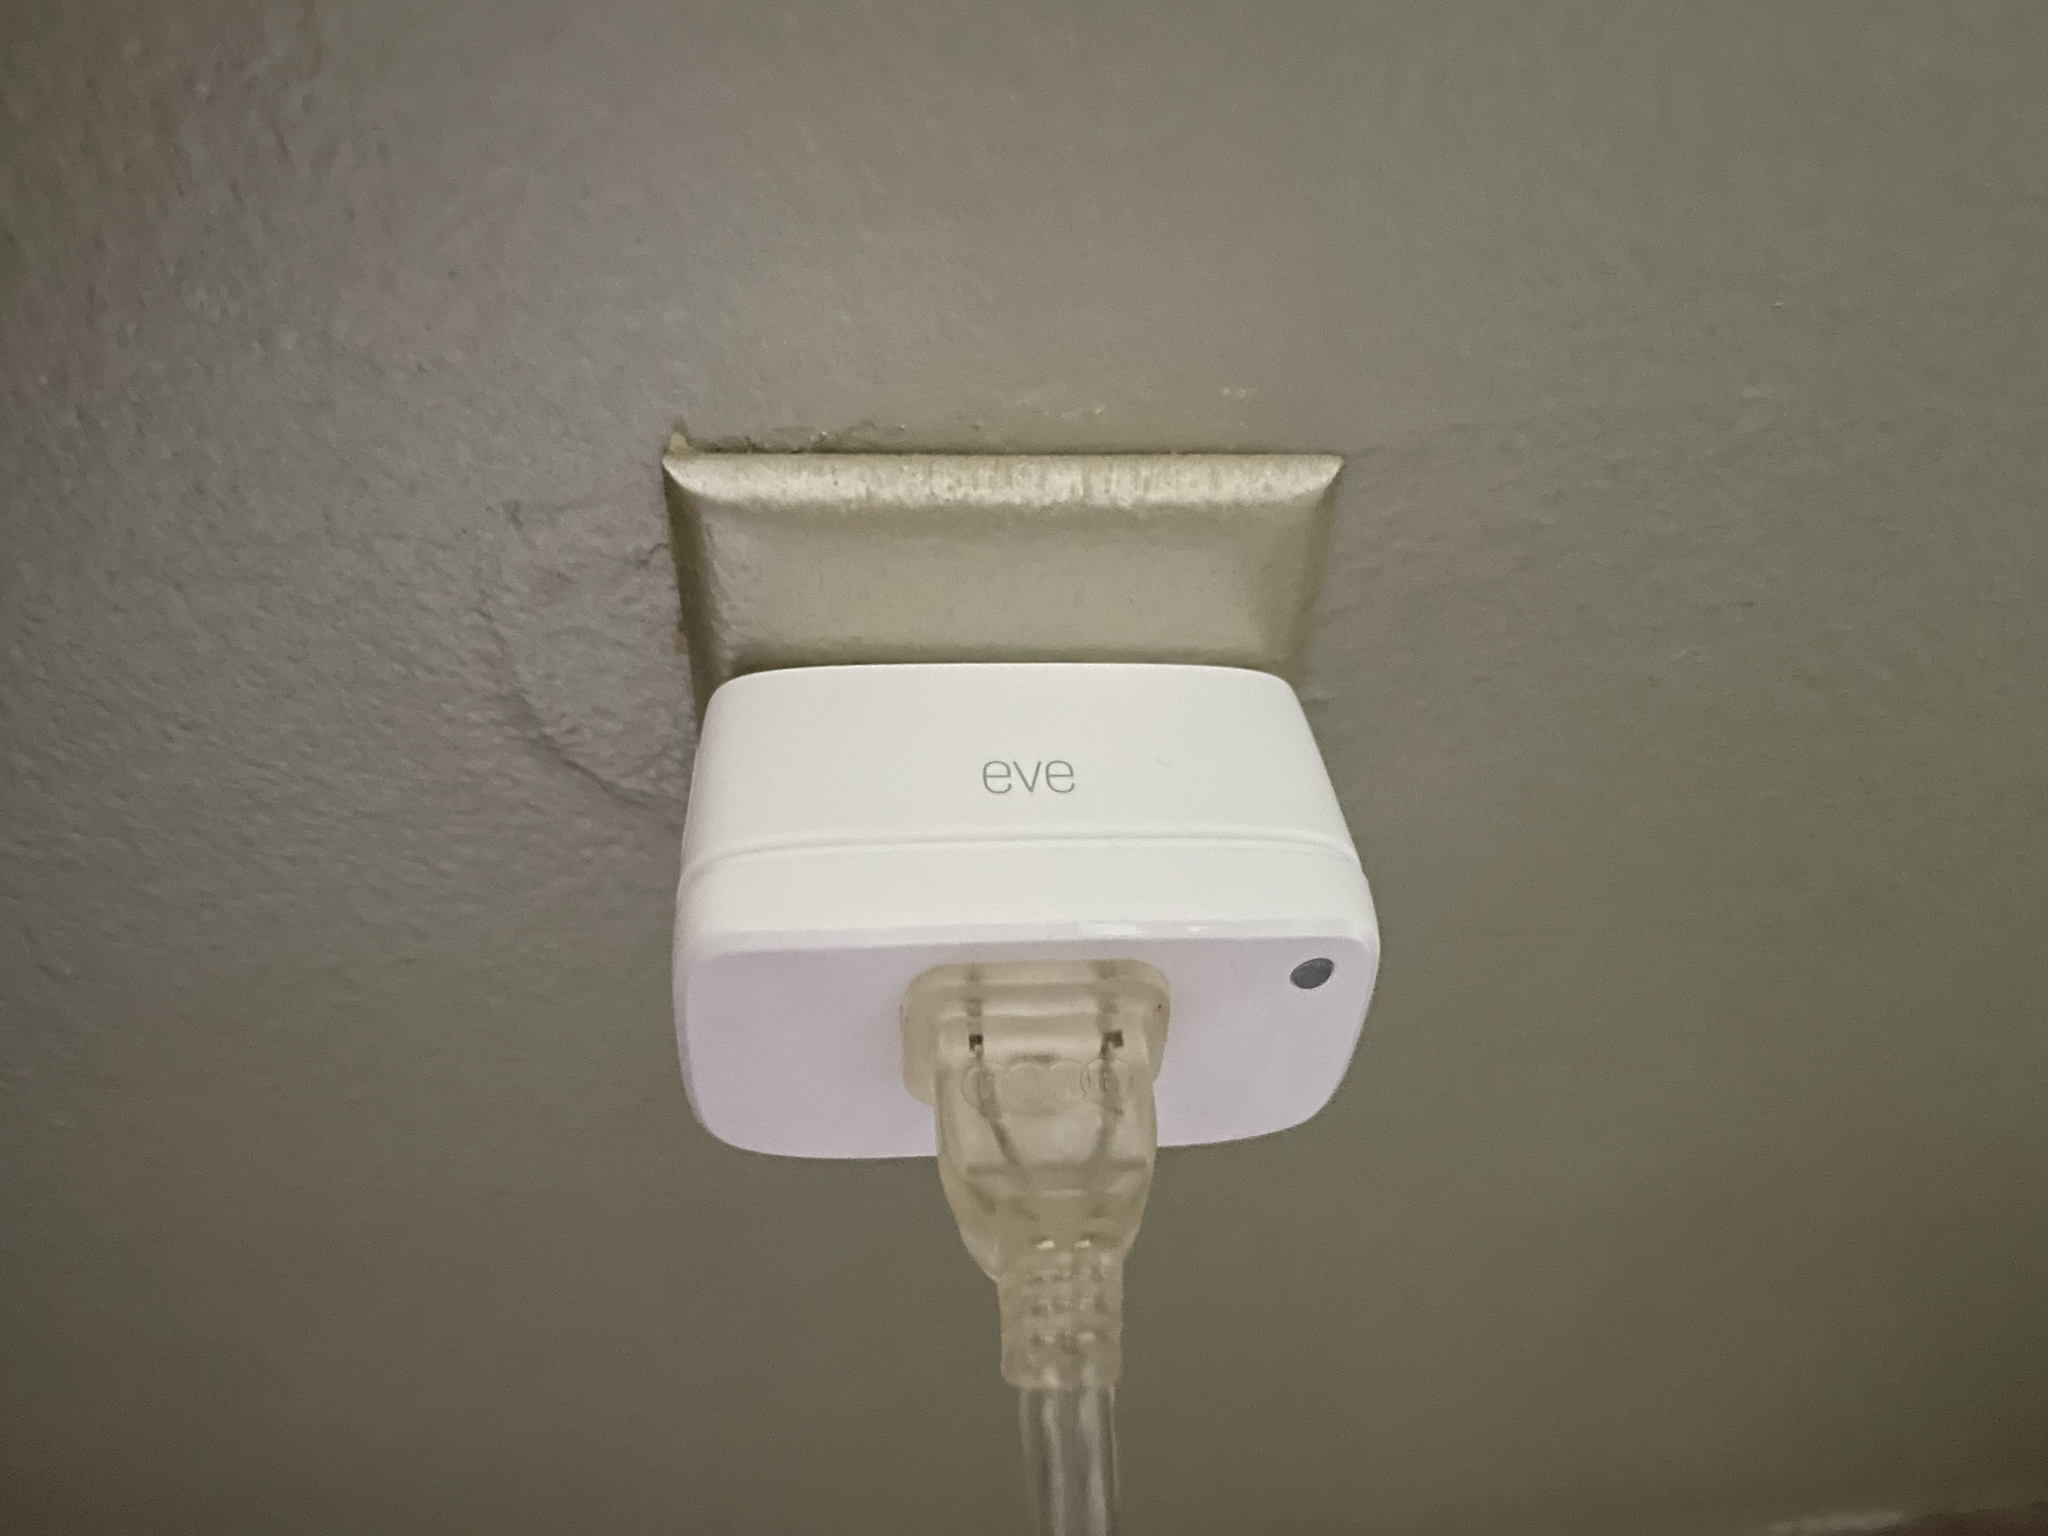 Eve Energy Smart Plug and Power Meter Plugged In Off Lifestyle